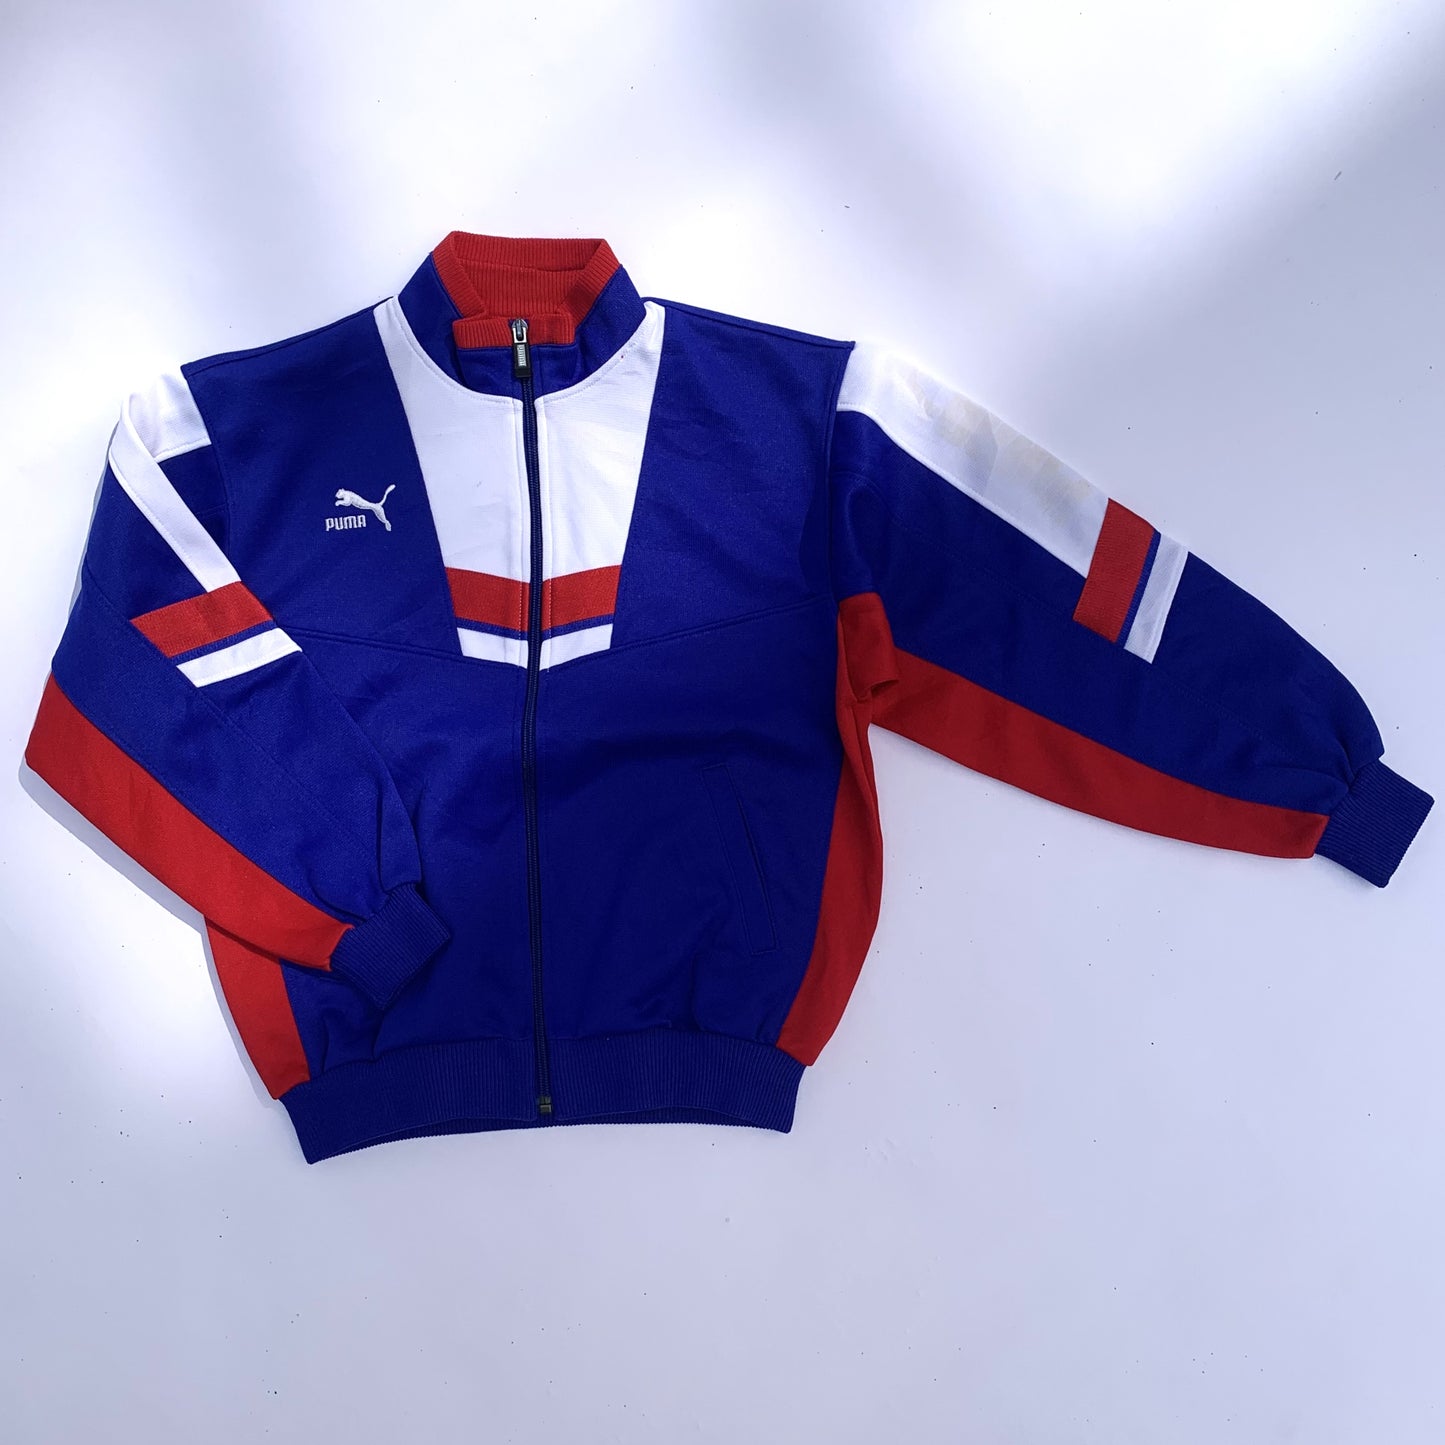 Red and Blue Puma Track Suit